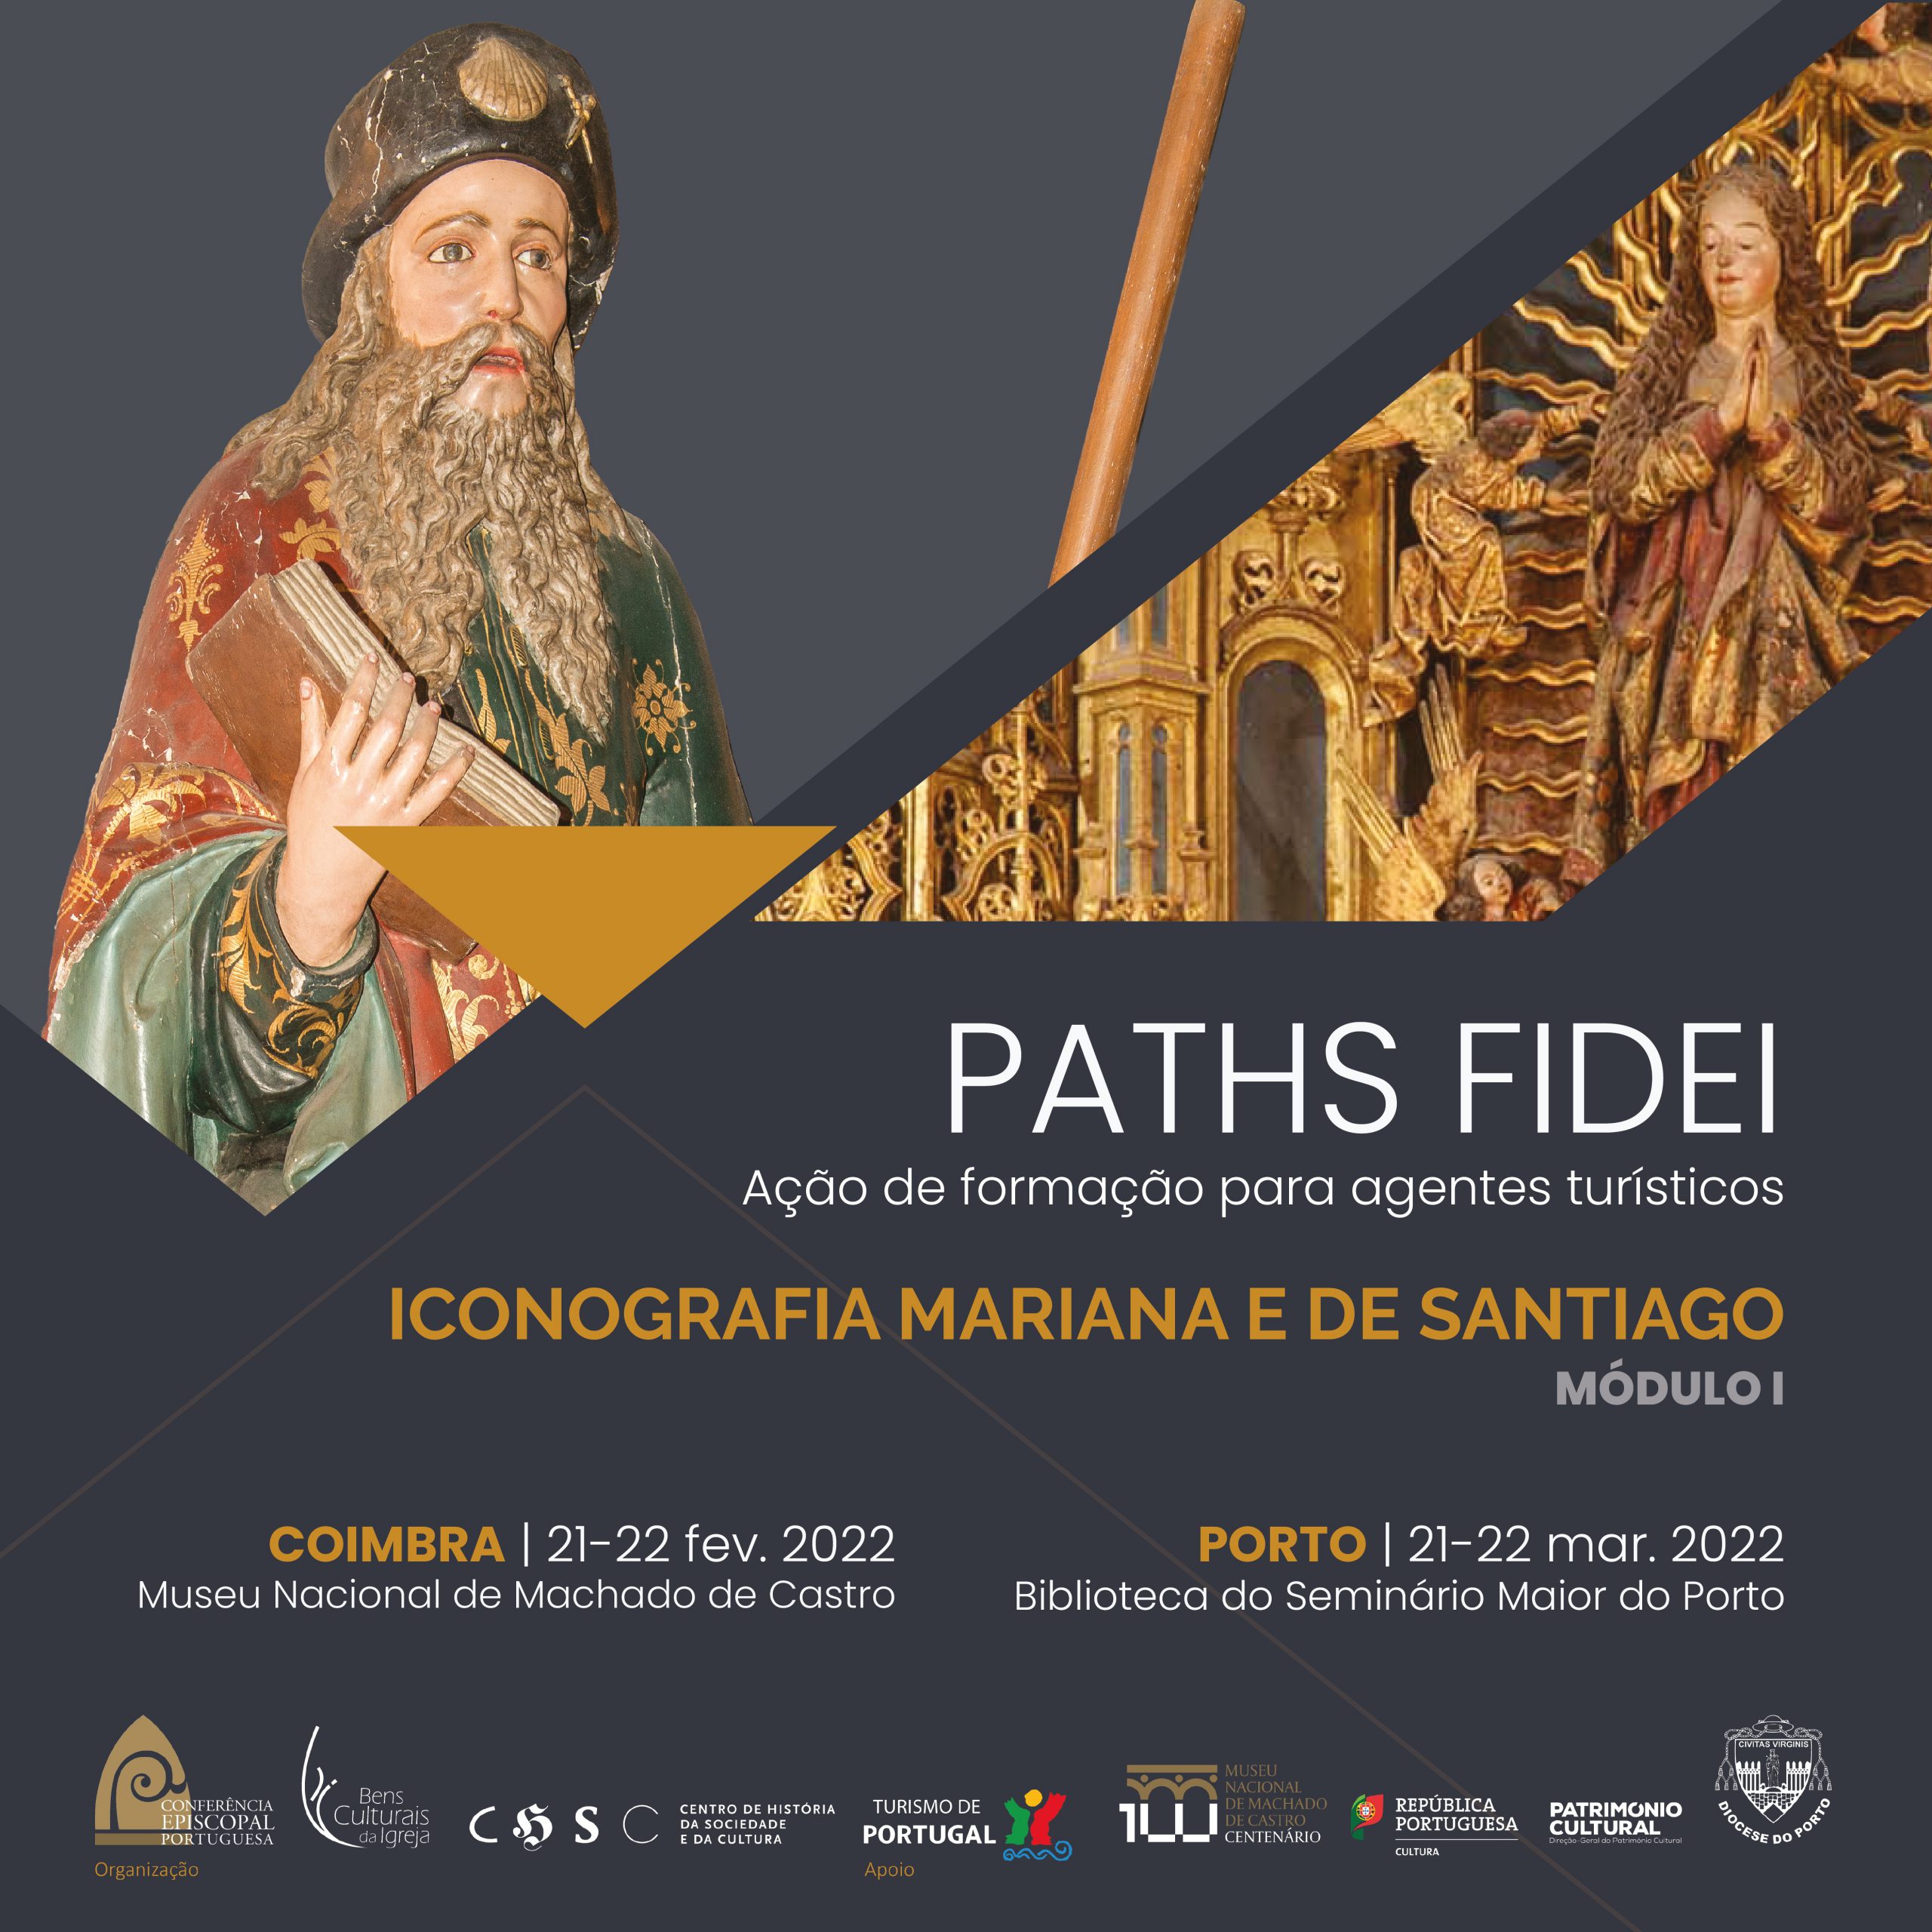 Paths Fidei: training course for tourism agents